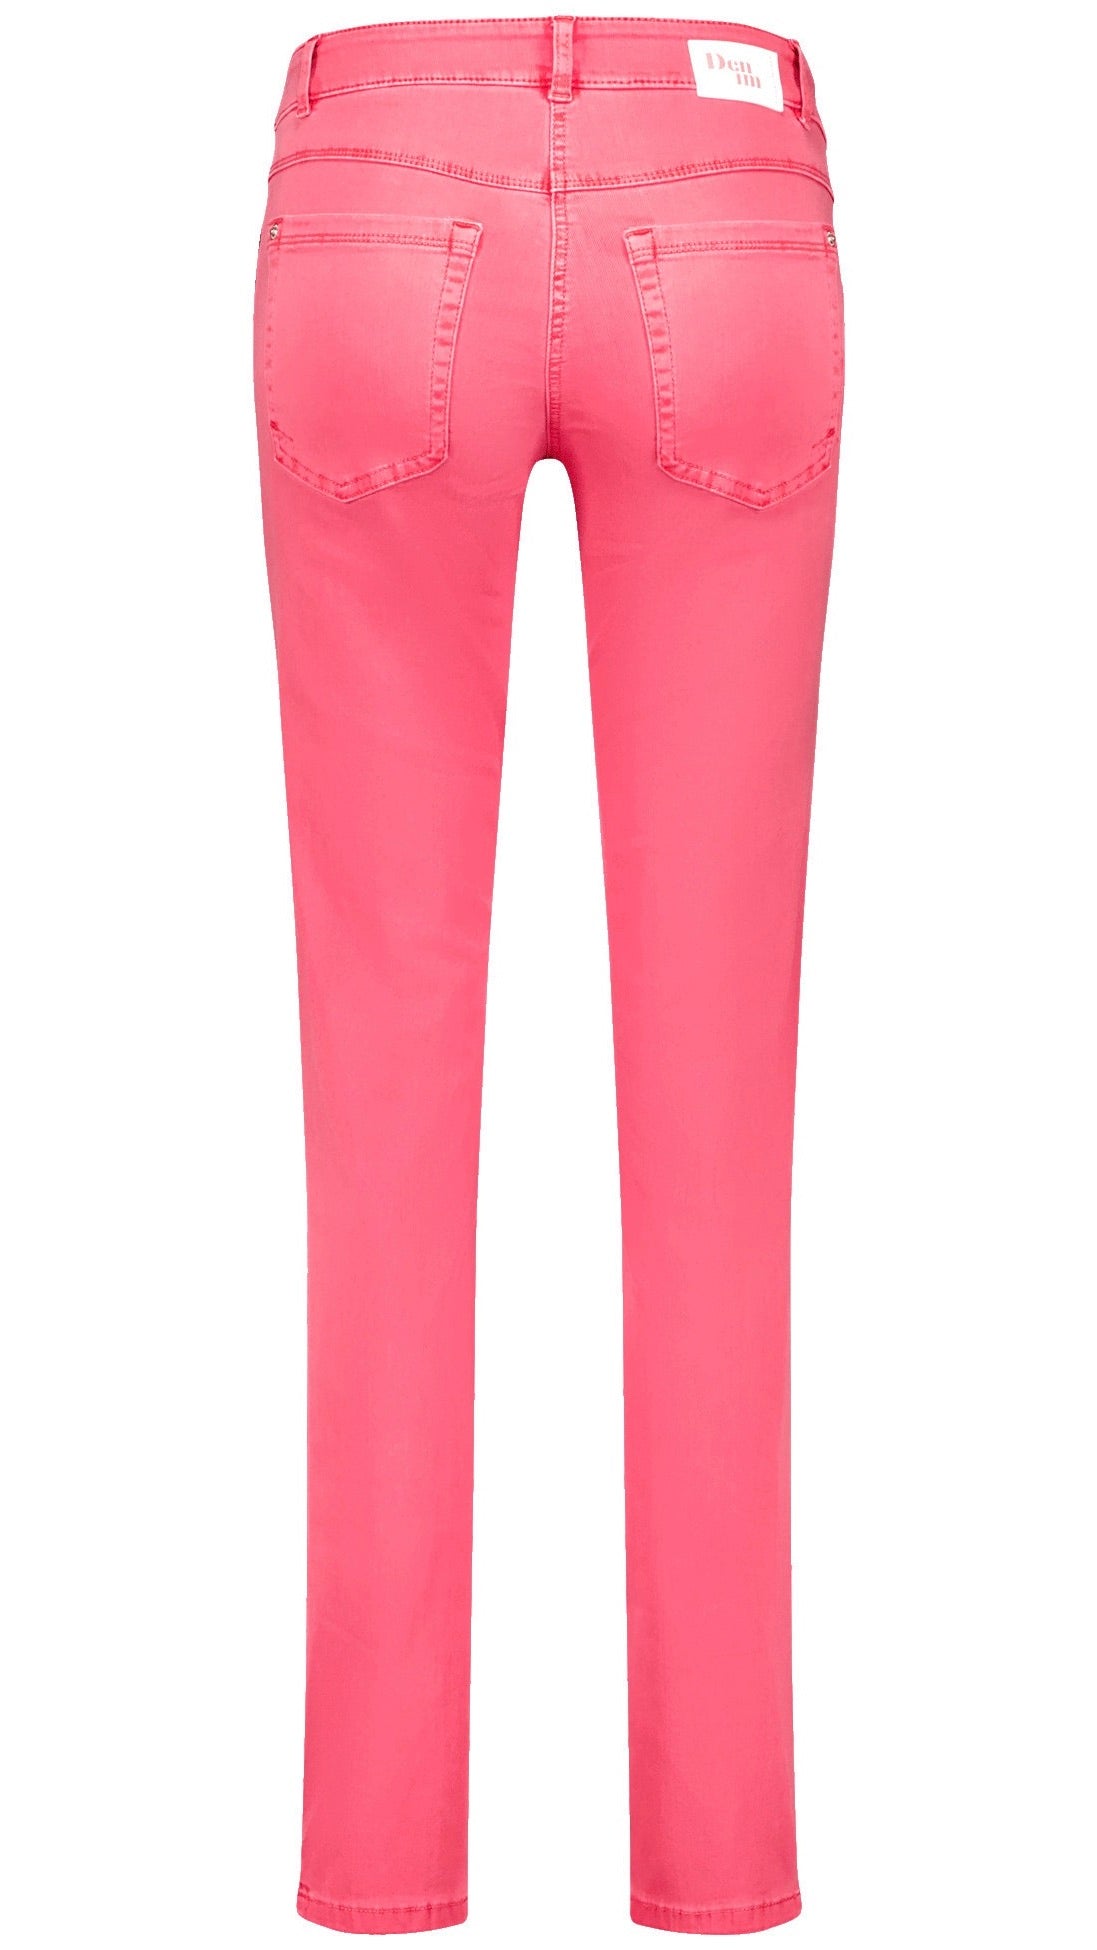 JEANS BEST FOR ME GERRY WEBER 925051 66829 #color_601407/corail